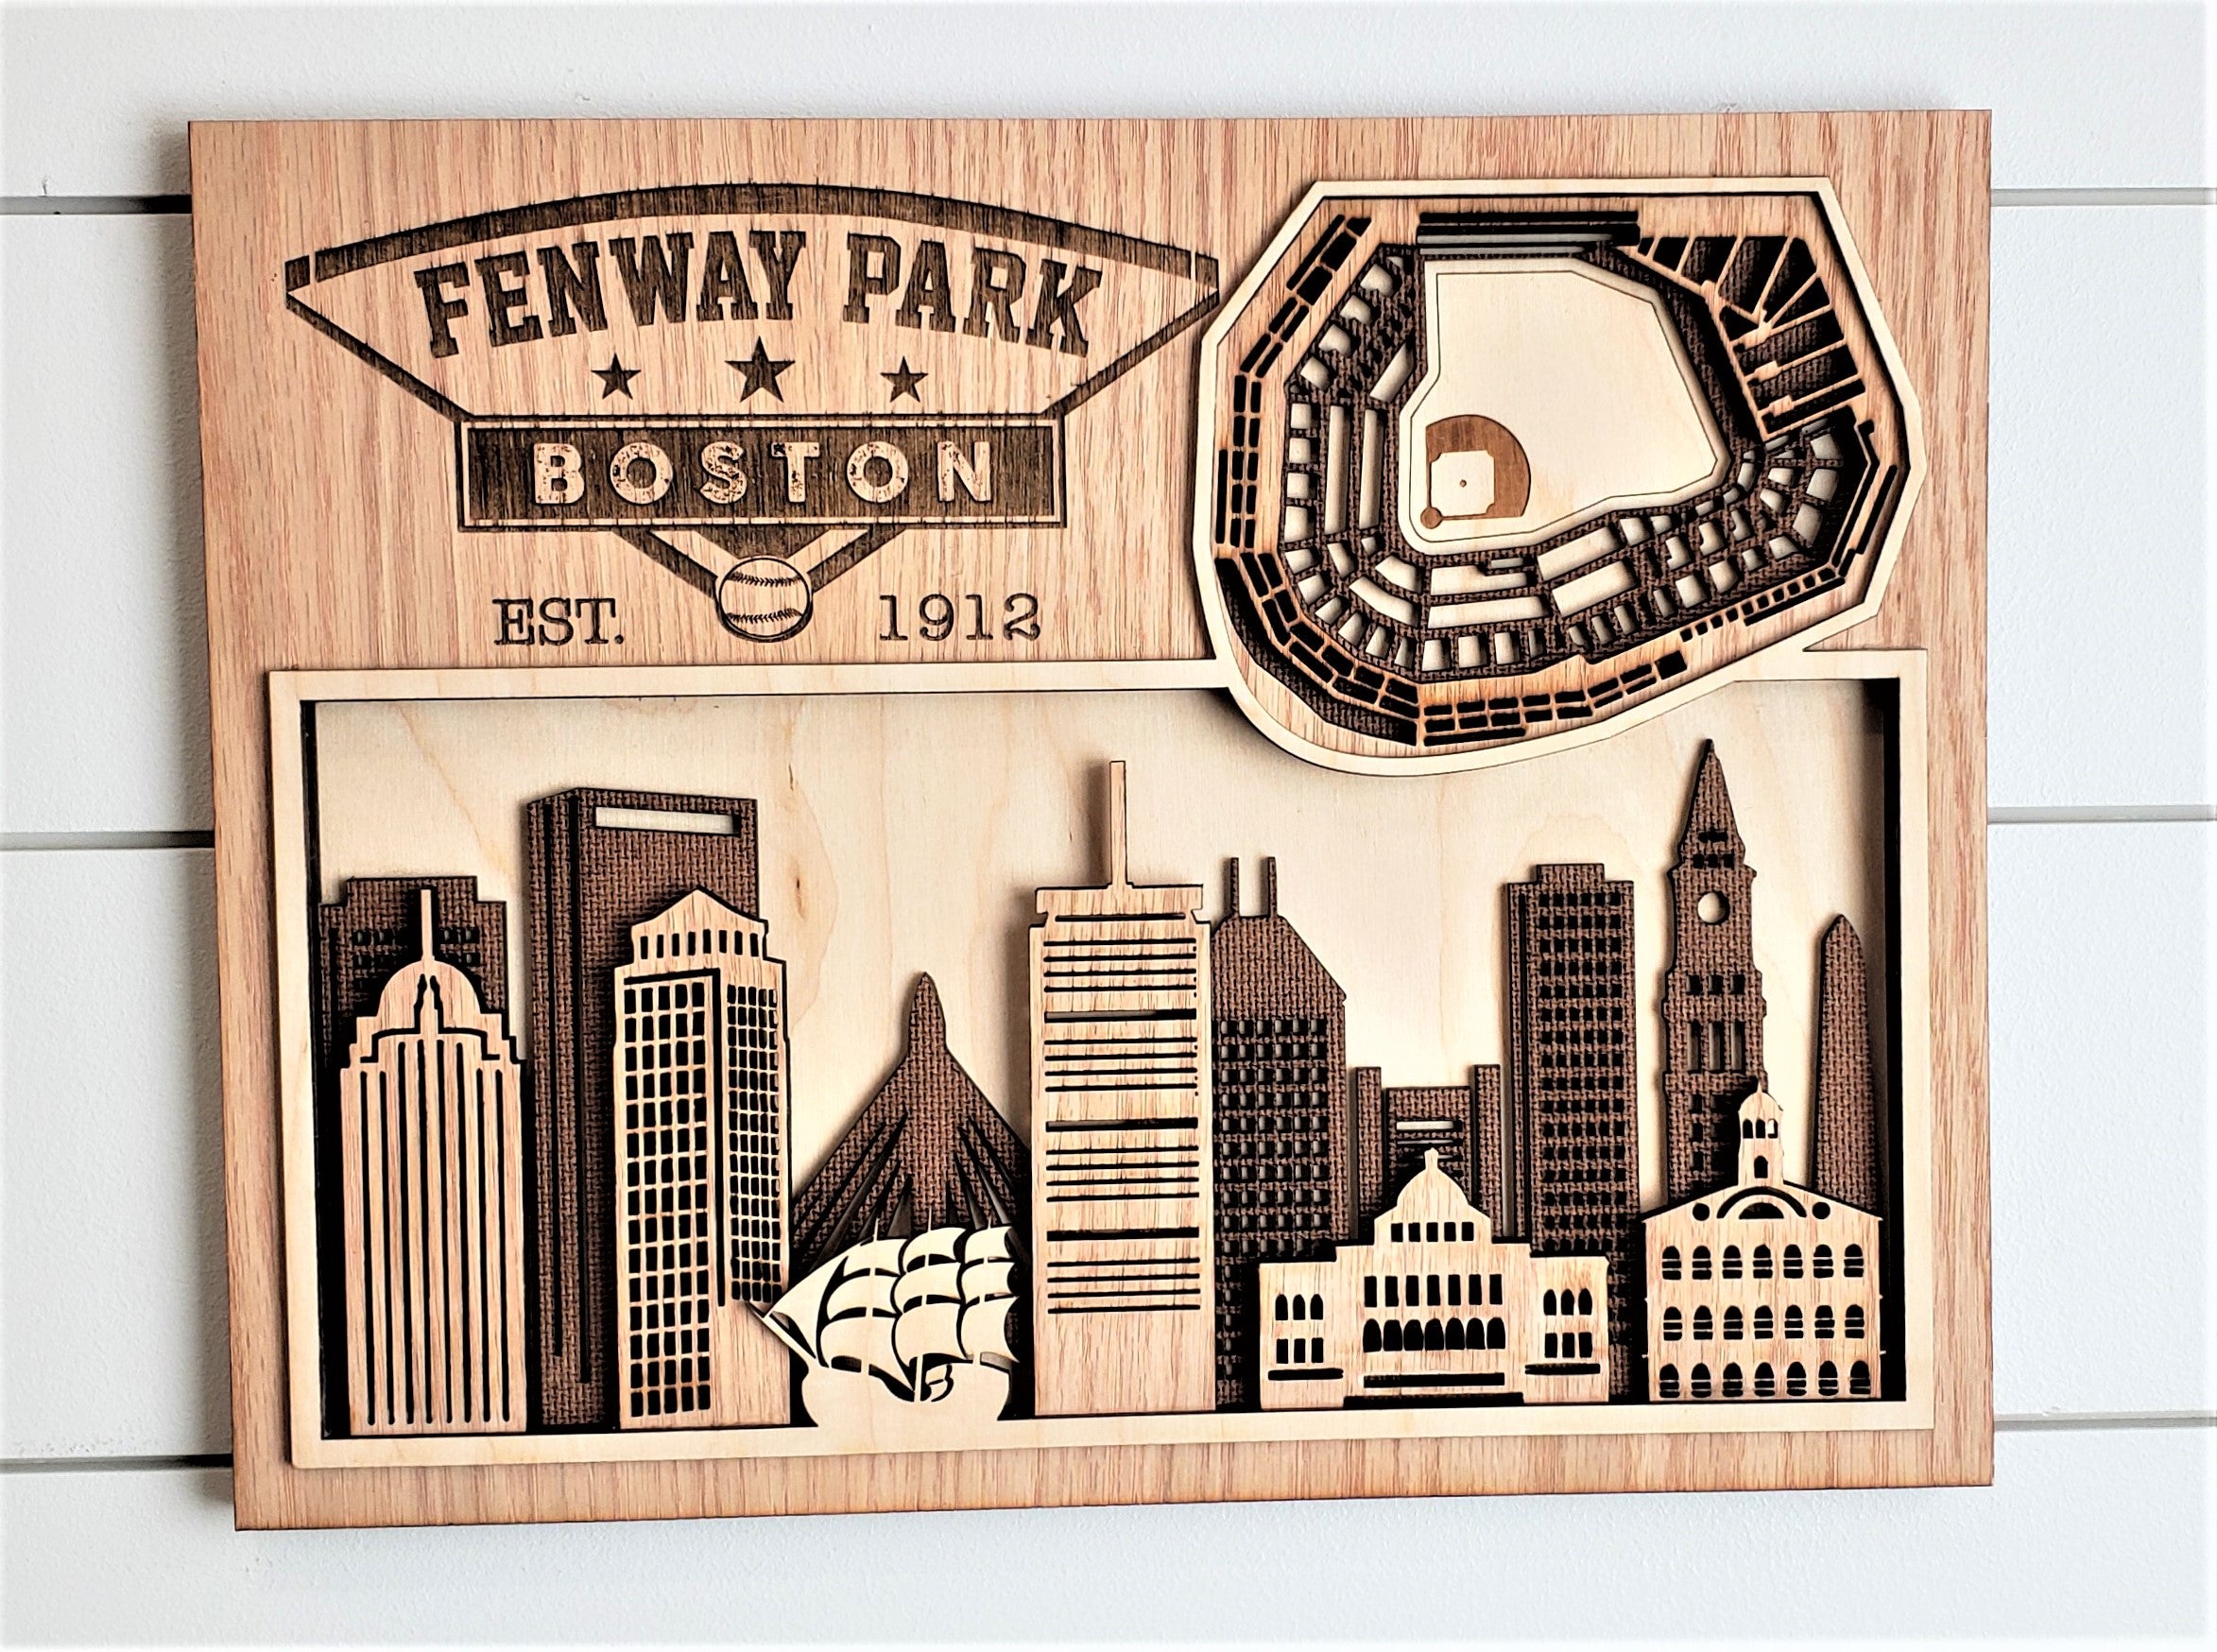 Fenway Park - Home of the Boston Red Sox